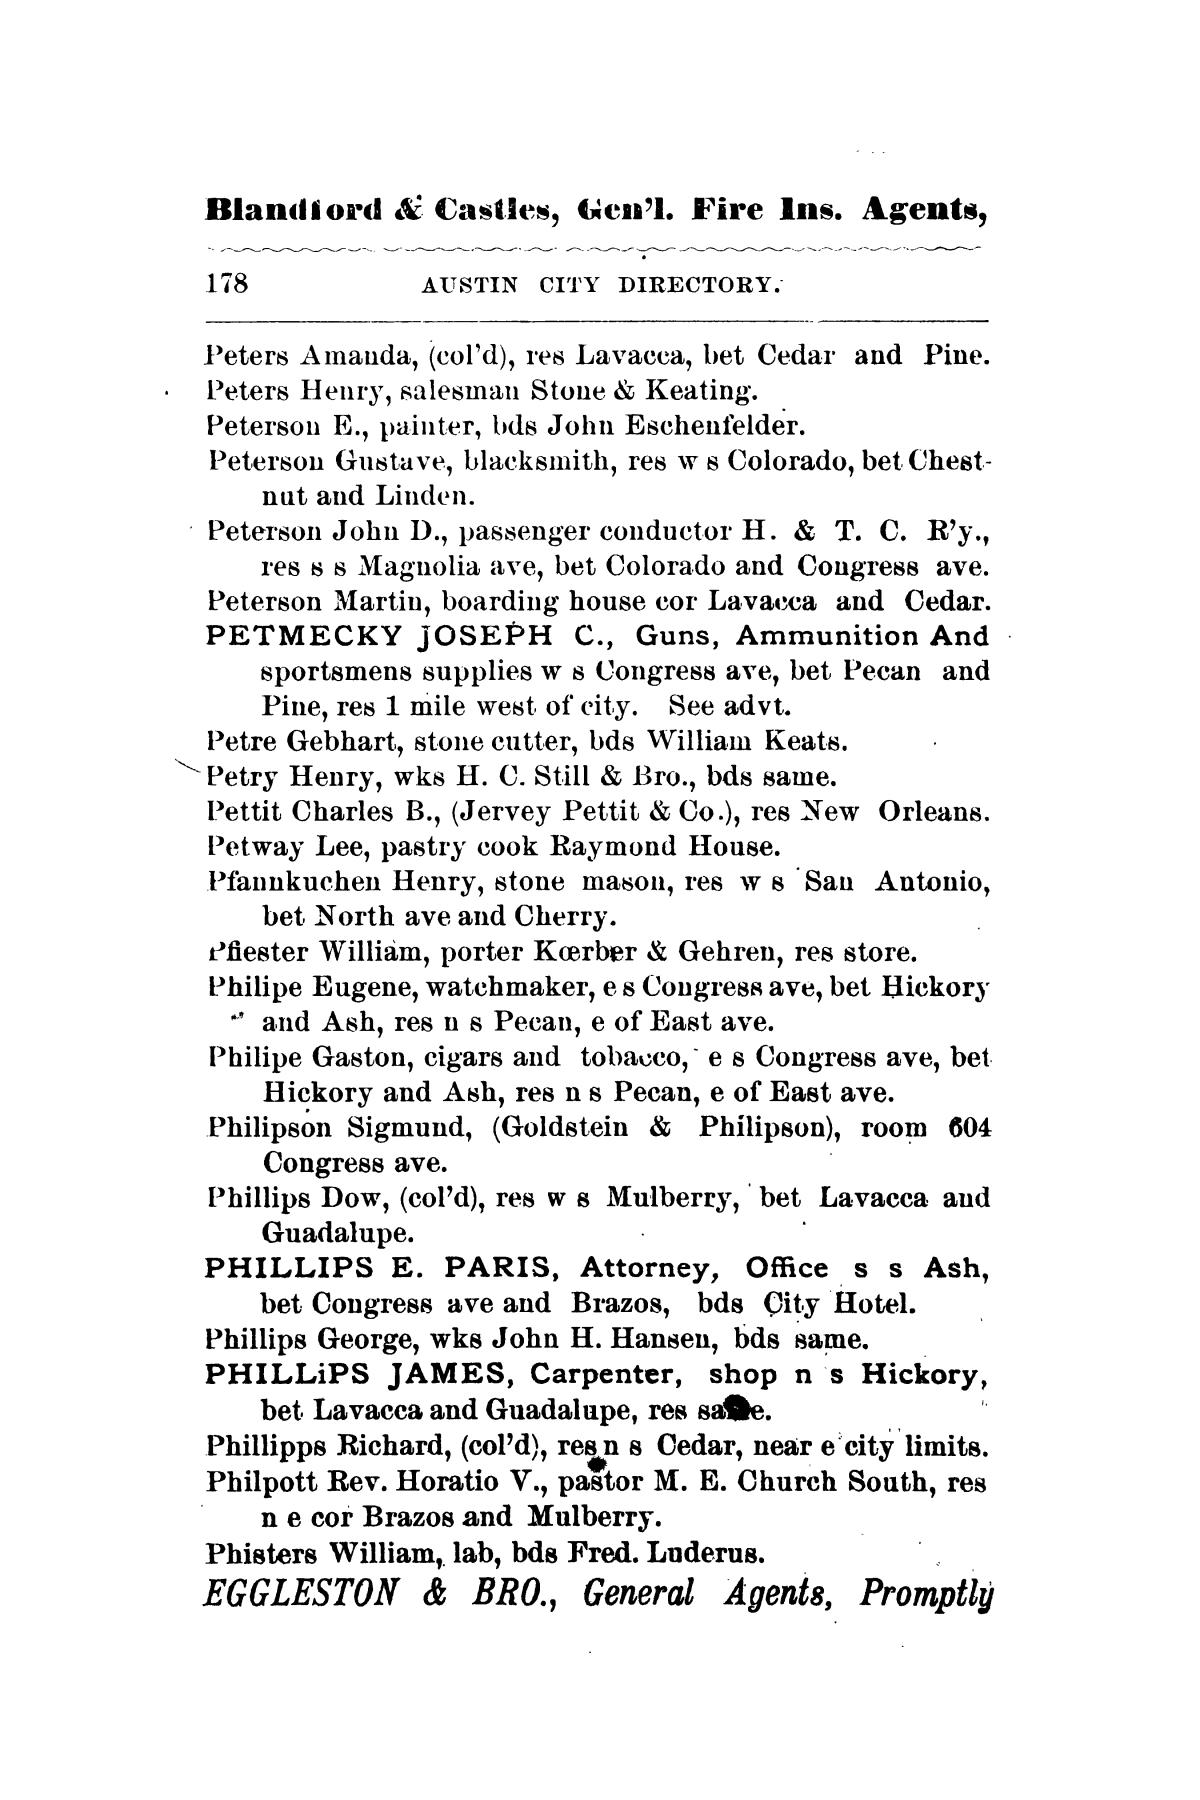 Mooney & Morrison's General Directory Of The City Of Austin, Texas, For 1877-78.
                                                
                                                    178
                                                